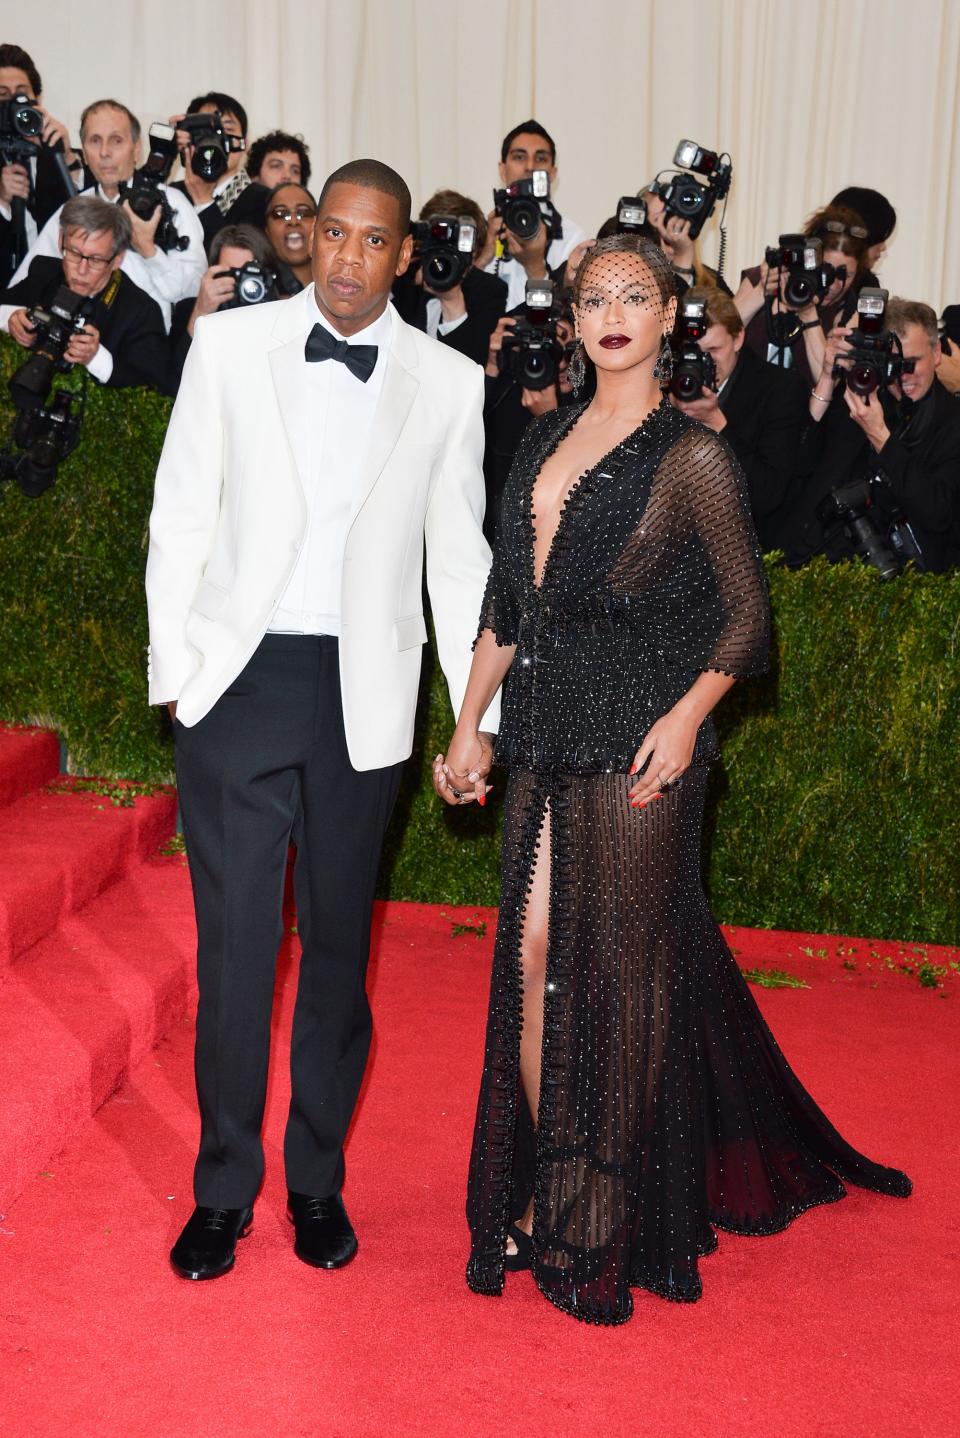 Jay-Z and Beyoncé on the red carpet at the 2014 Met Gala. Jay-Z wears a white tuxedo with black bowtie and pants. Beyonce wears a sparkling black dress with a plunging neckline and a birdcage veil.